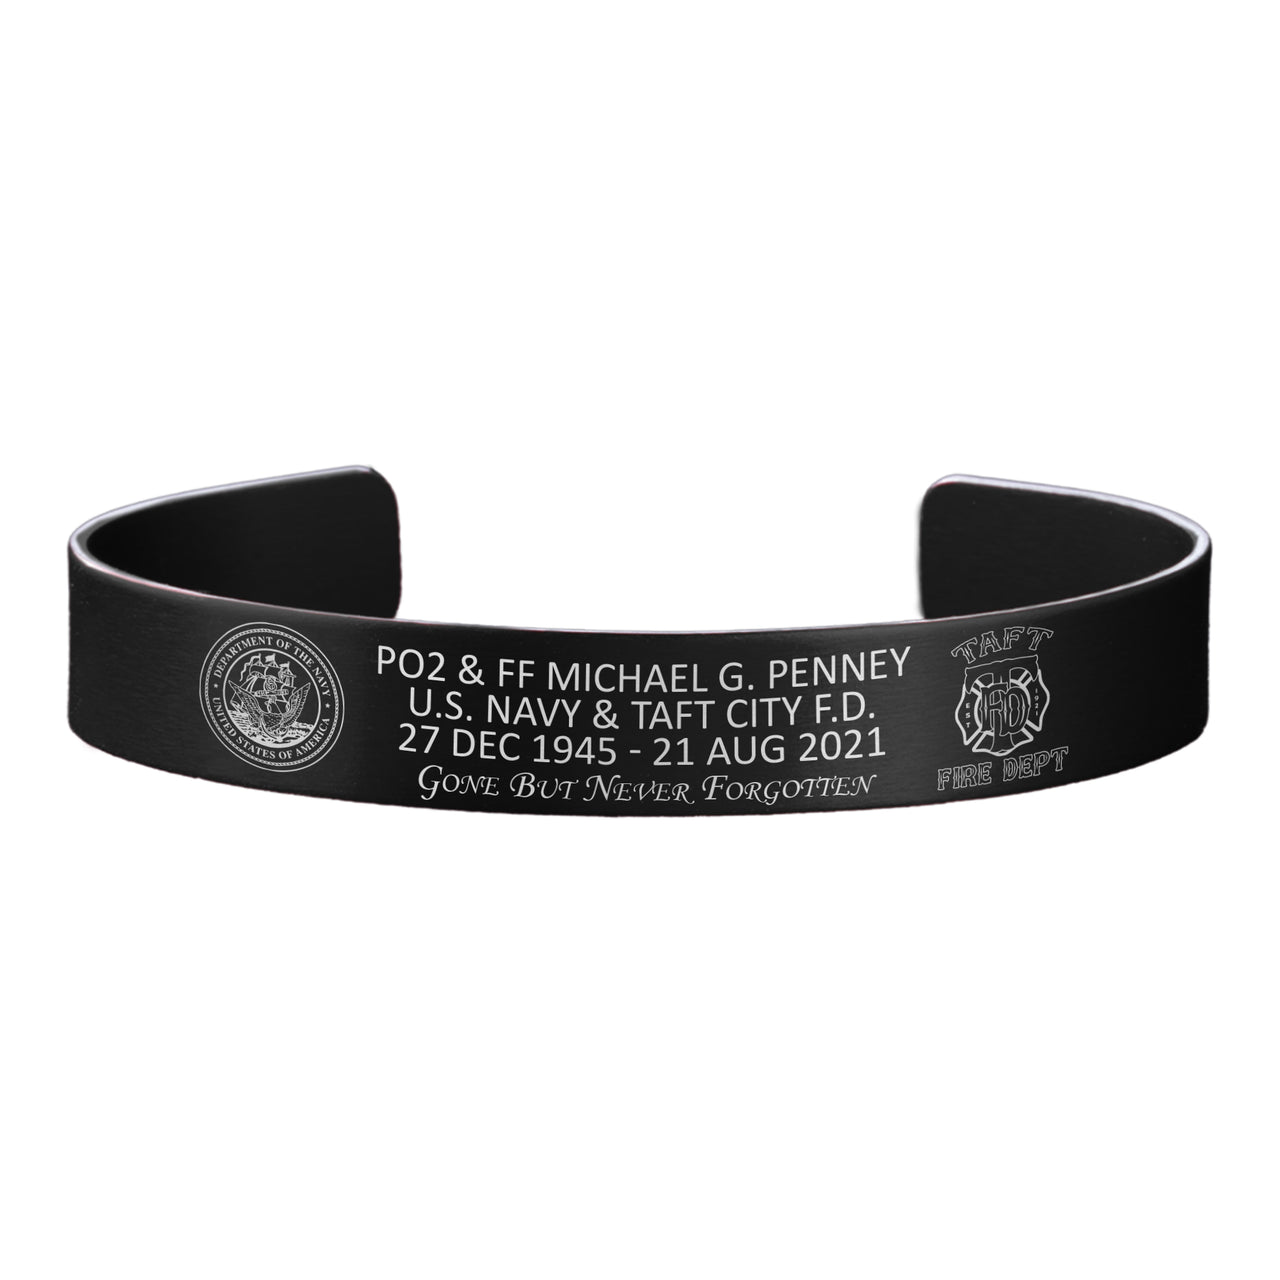 PO2 & FF Michael G. Penney Memorial Band – Hosted by the Penney Family